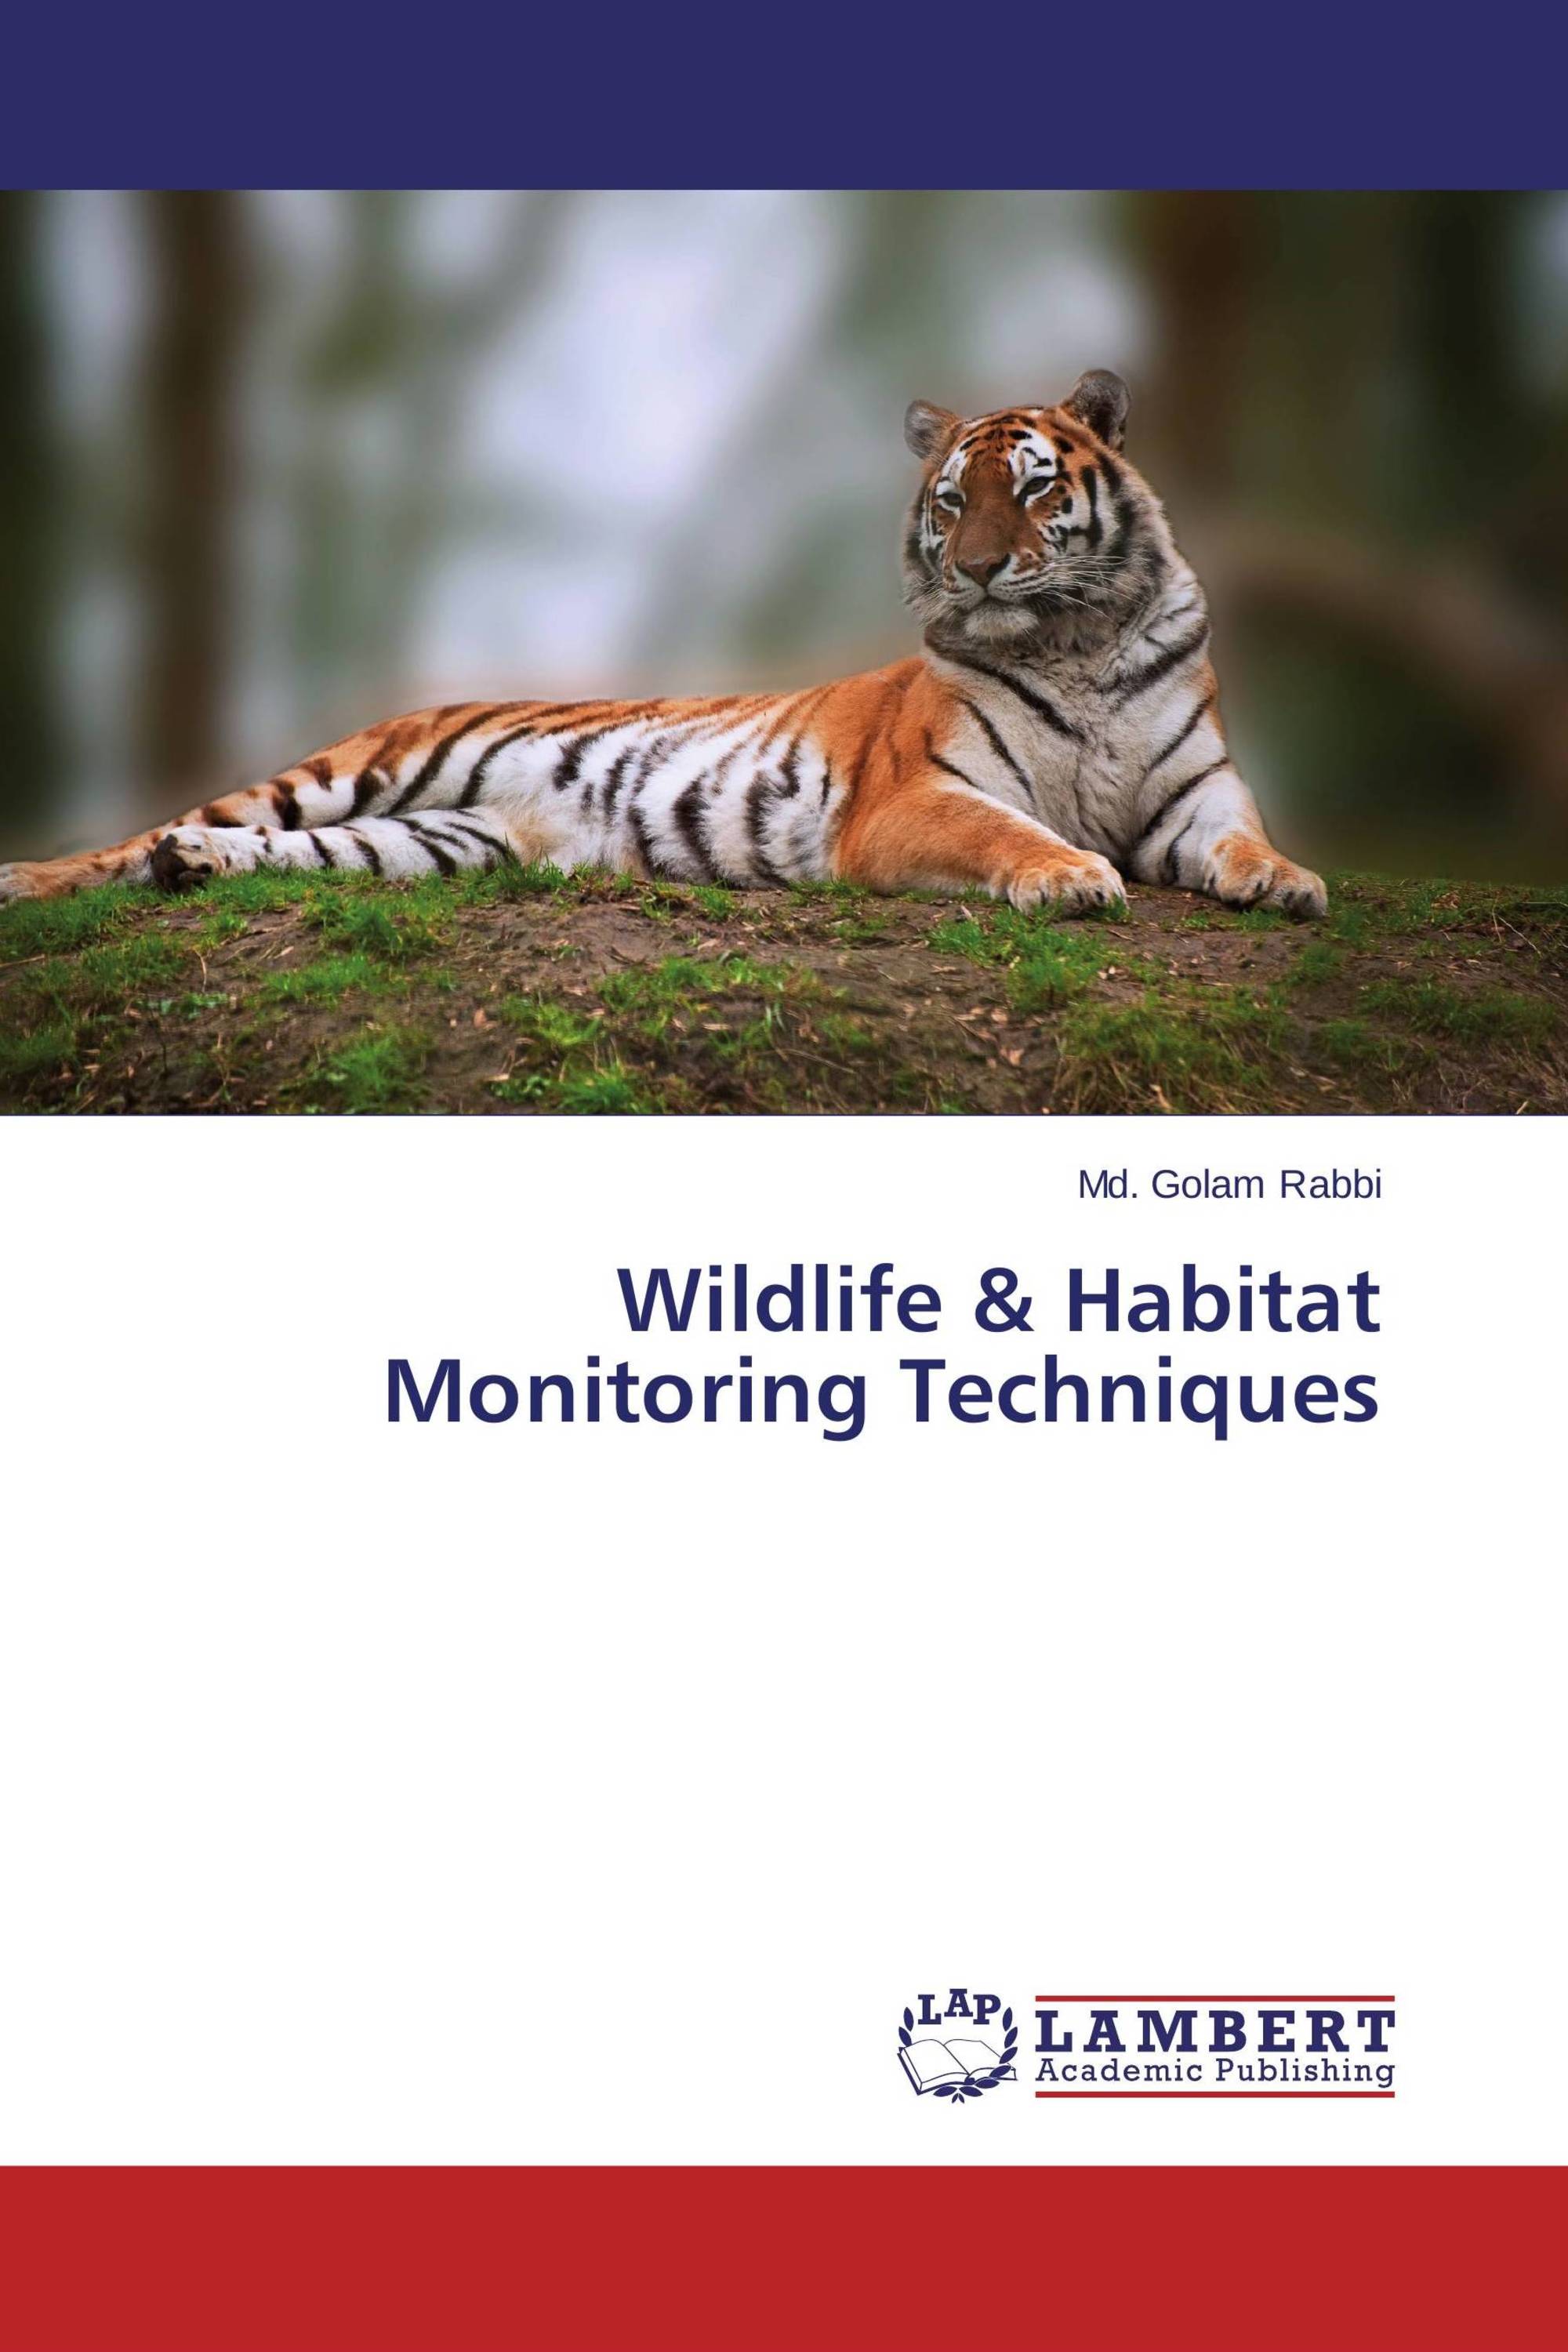 research and management techniques for wildlife and habitats